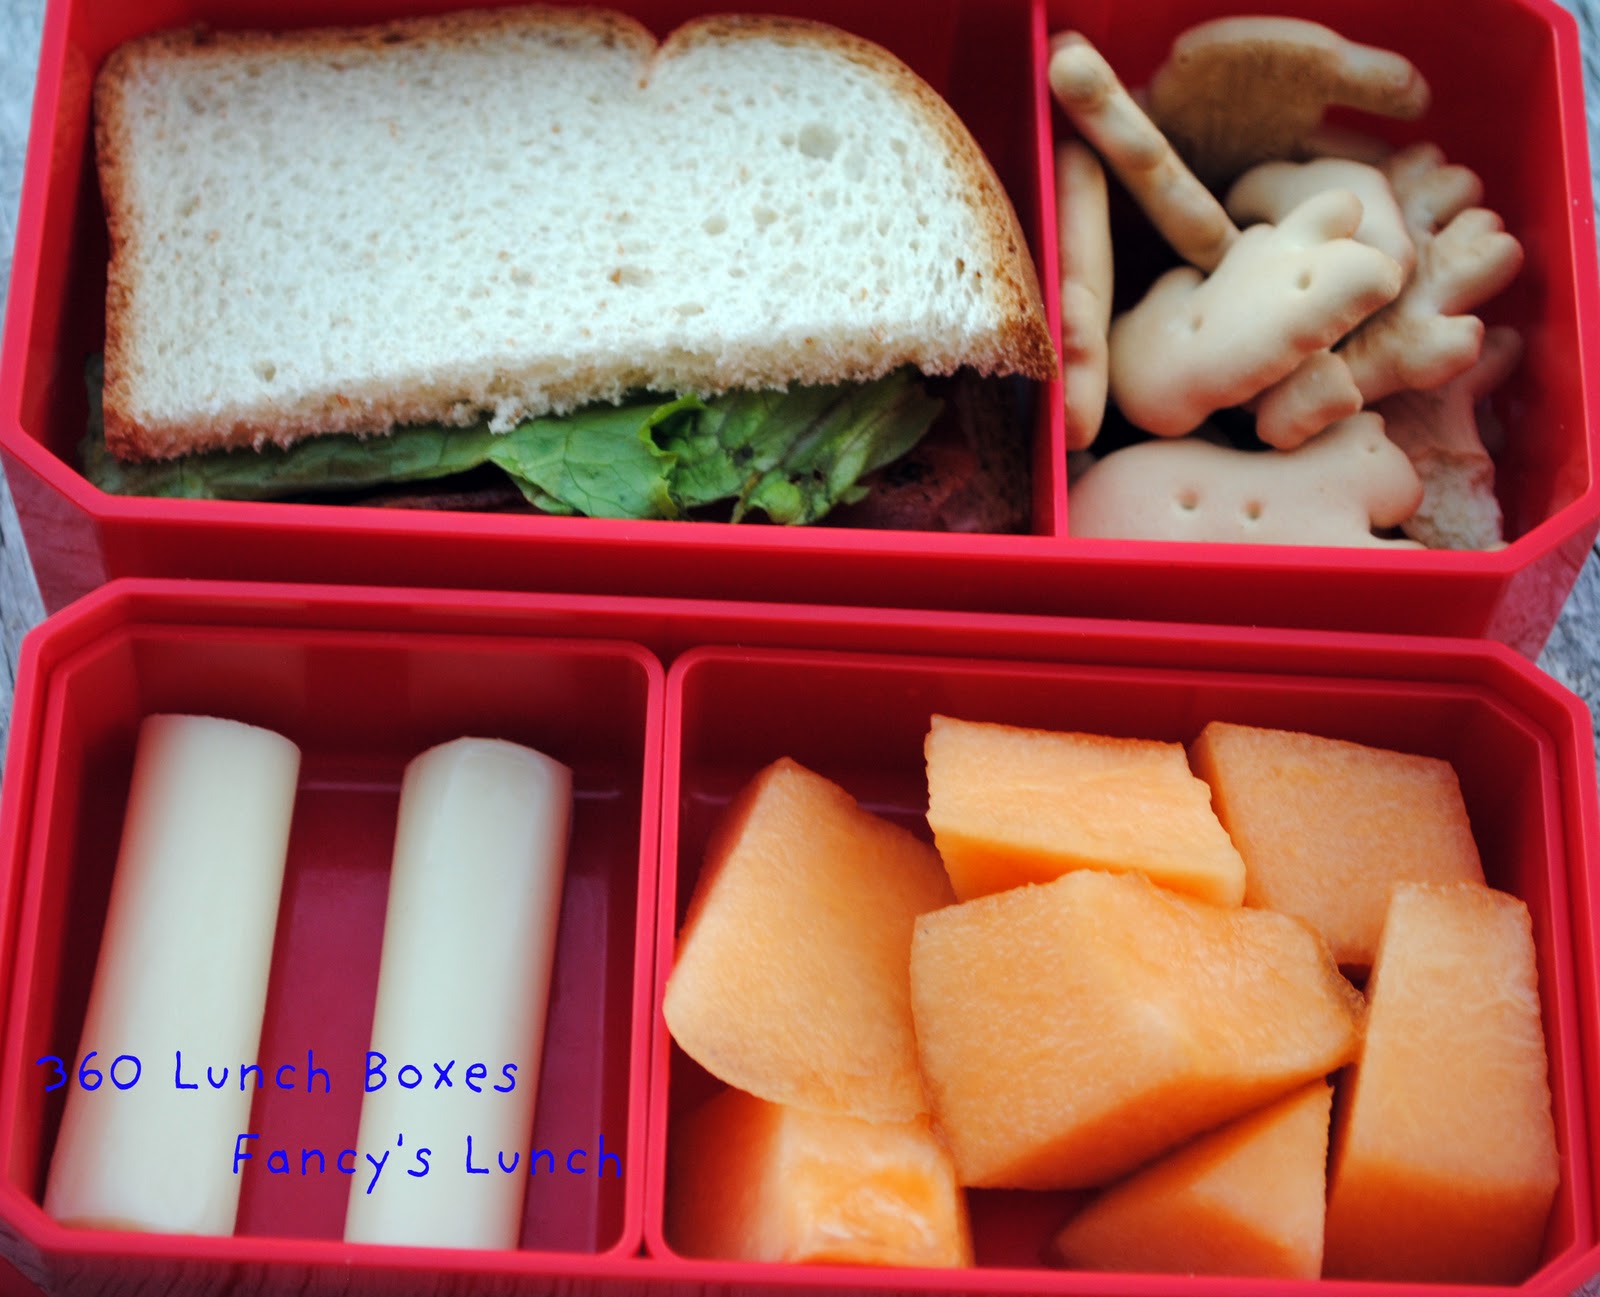 360 Lunch Boxes: Wednesday Lunches